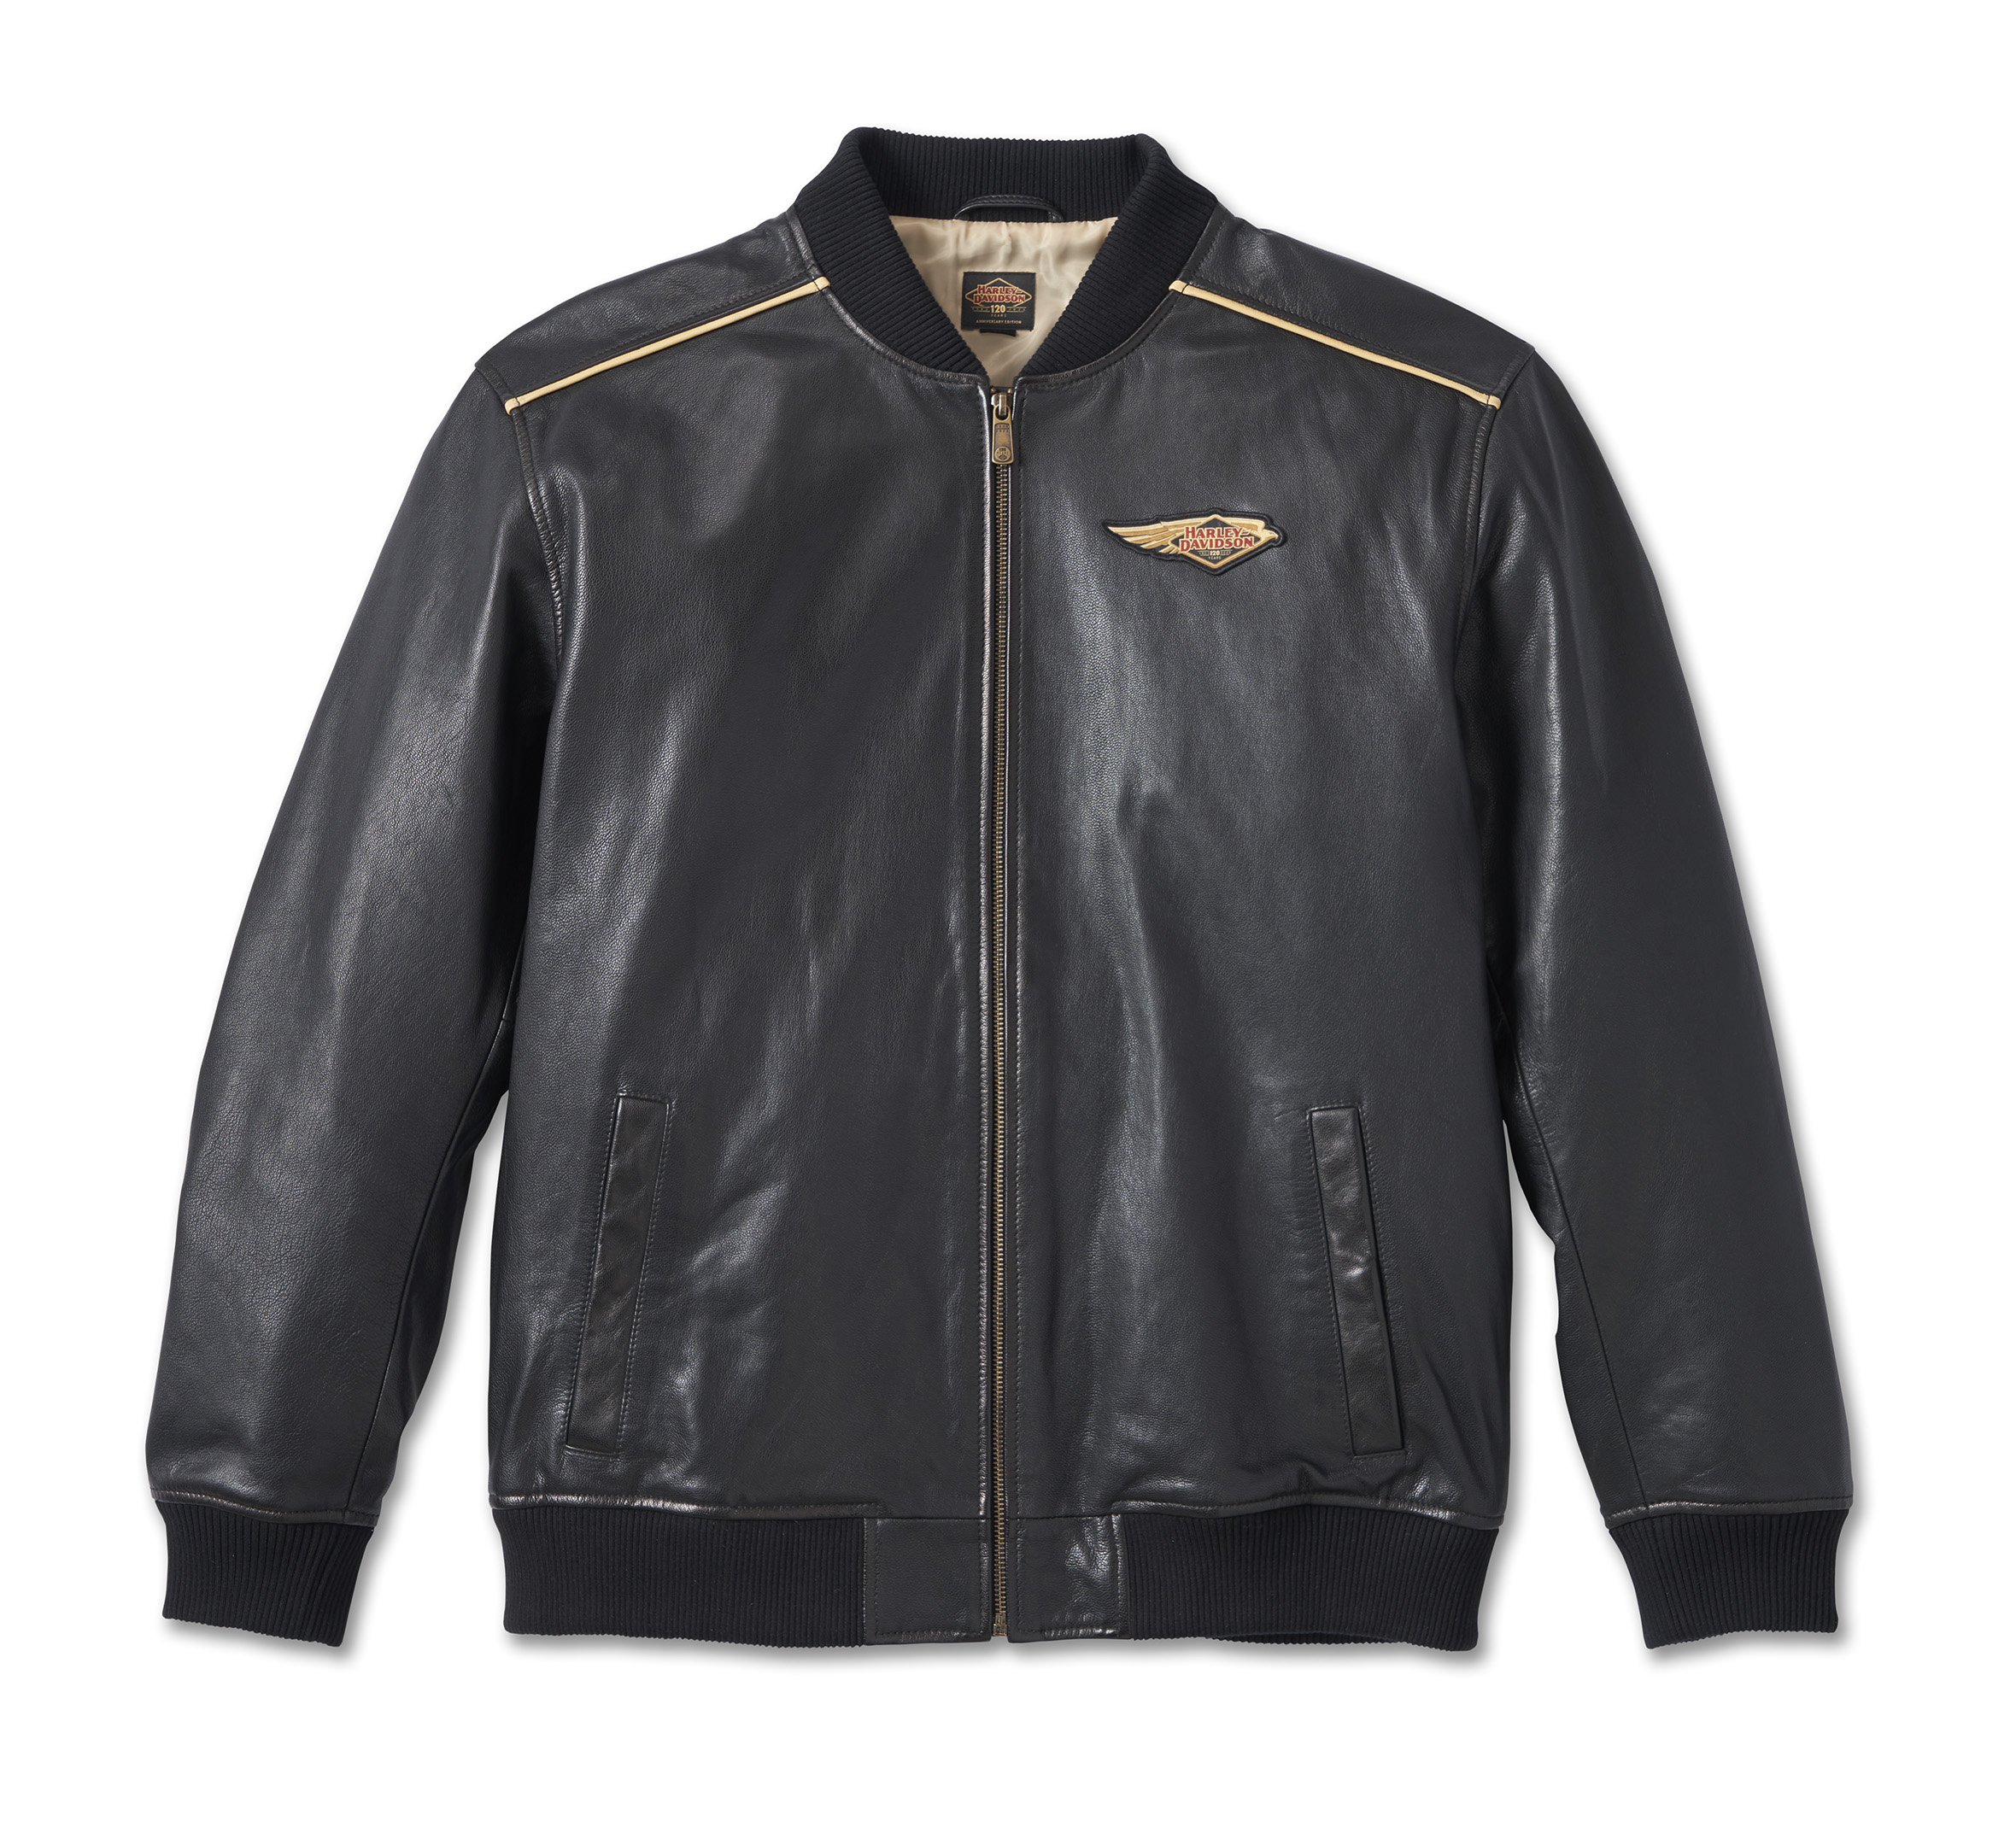 Men's 120th Anniversary Leather Jacket - Black Leather | Harley